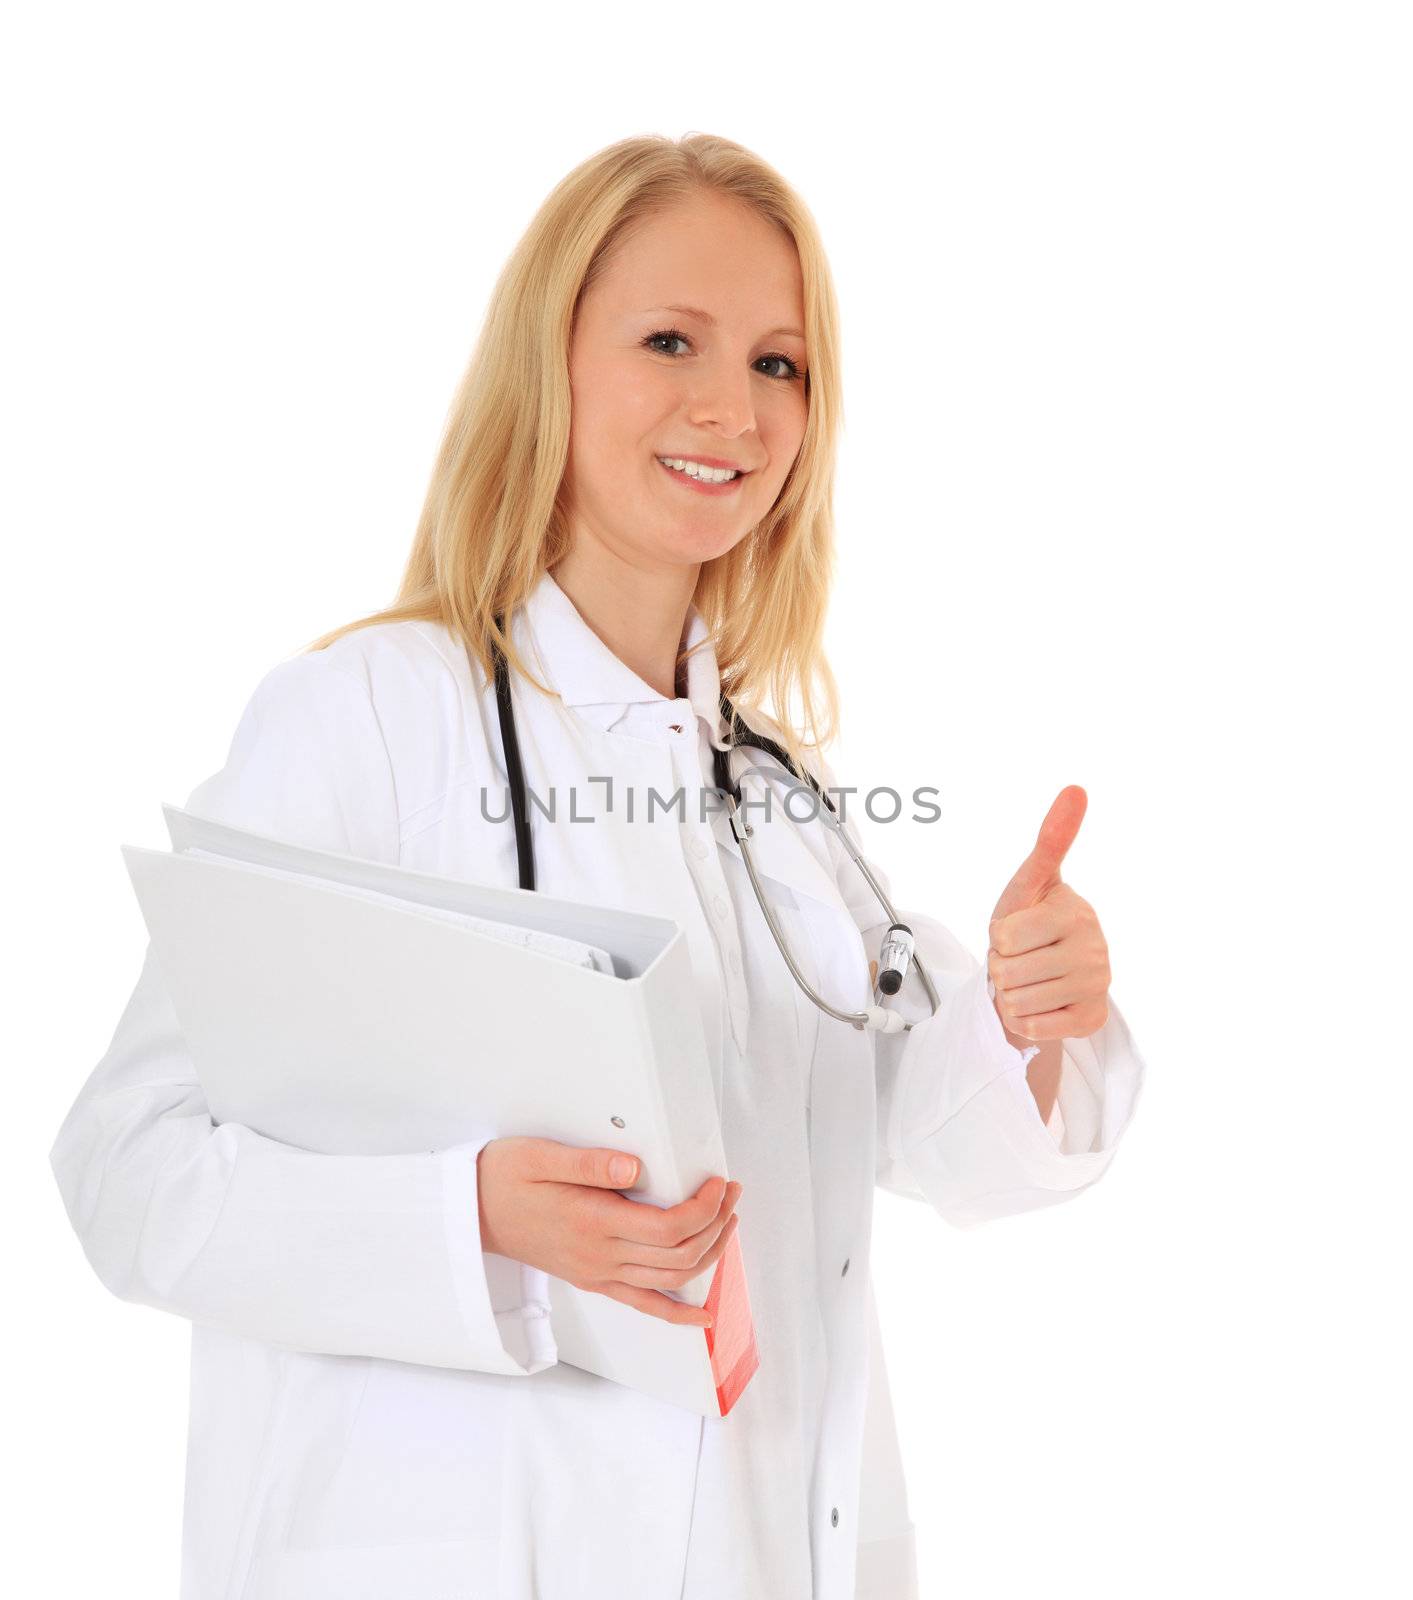 Attractive physician showing thumbs up. All on white background.